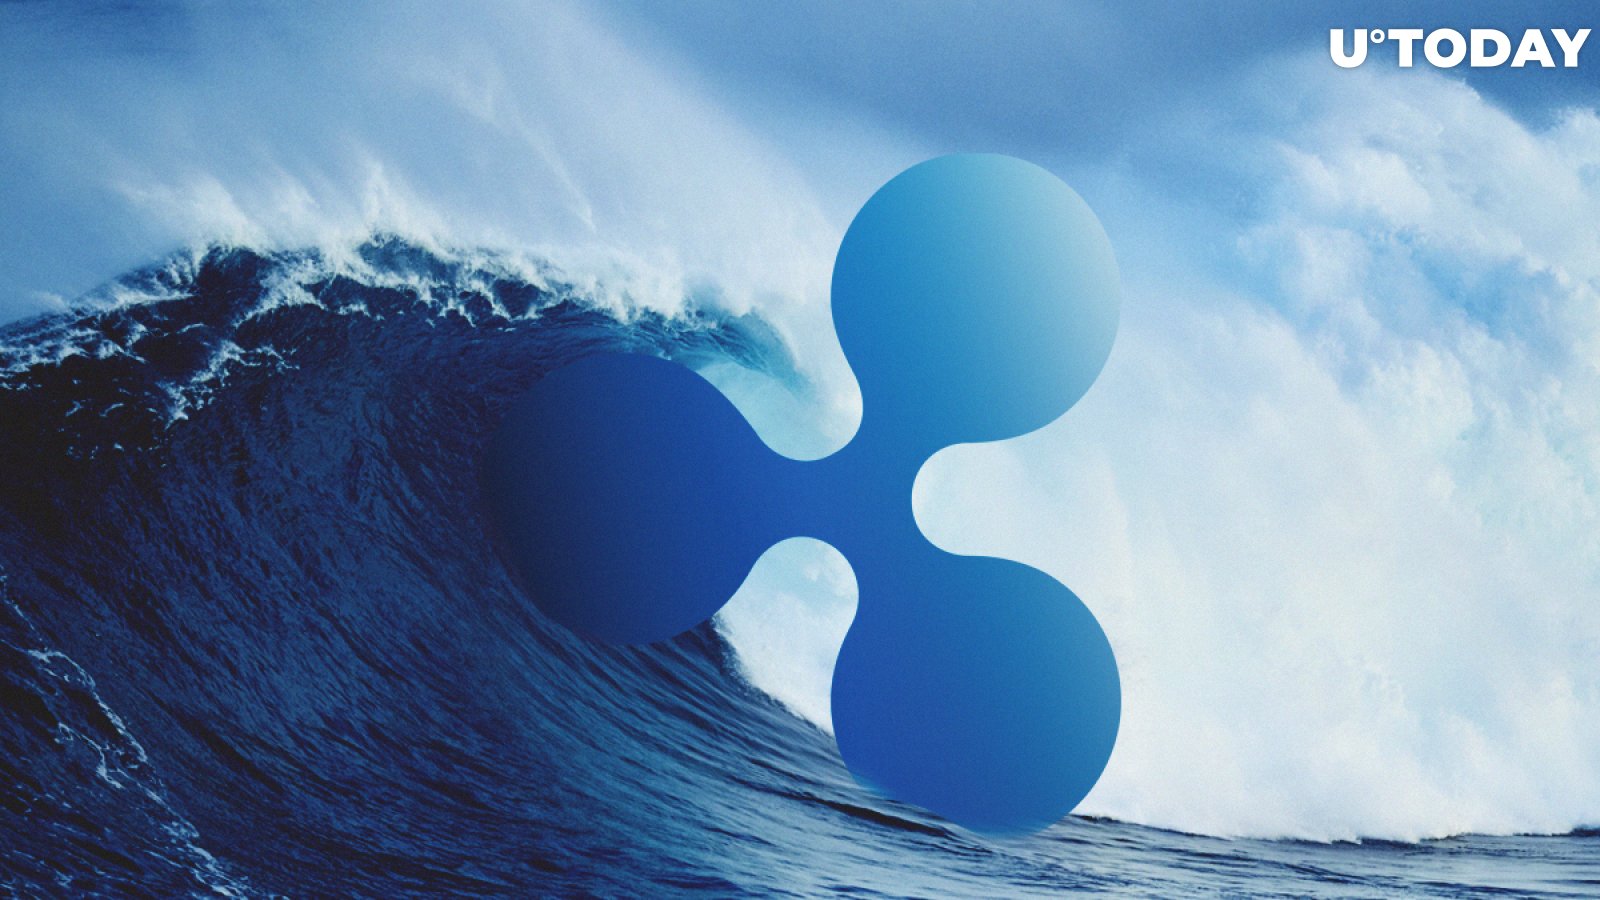 XRP Price Is about to Repeat the 2017 Surge Due to Swell Conference, Traders Say